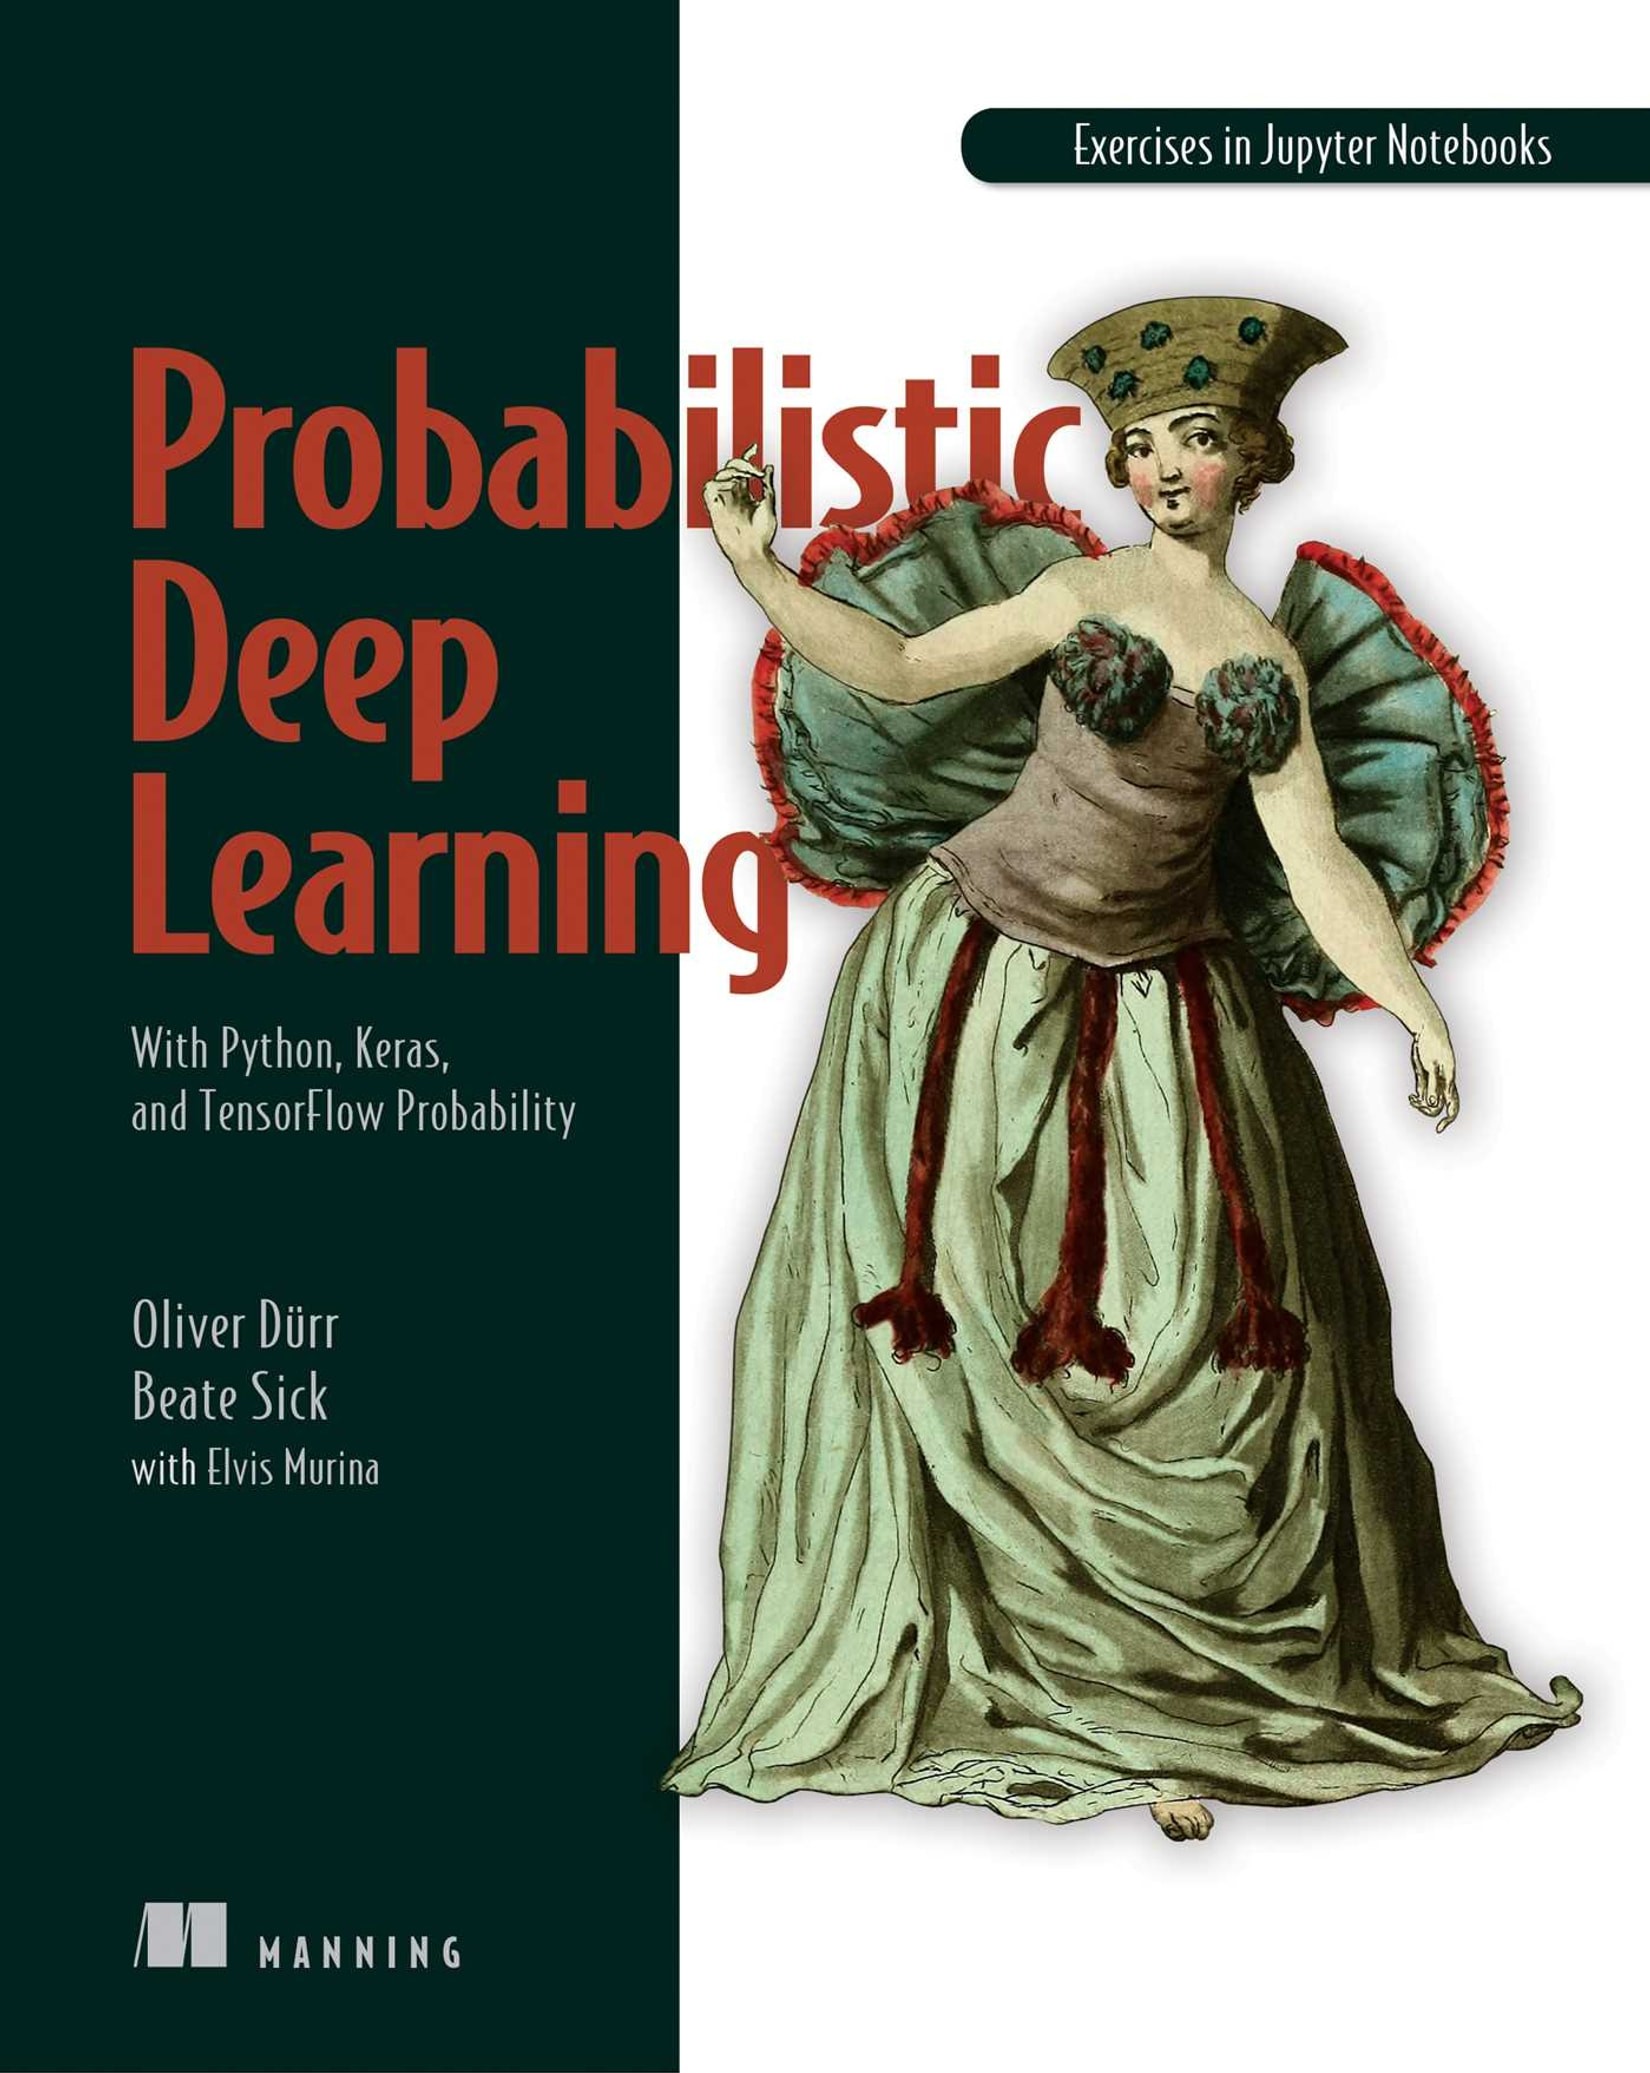 Probabilistic Deep Learning: with Python, Keras and TensorFlow Probability